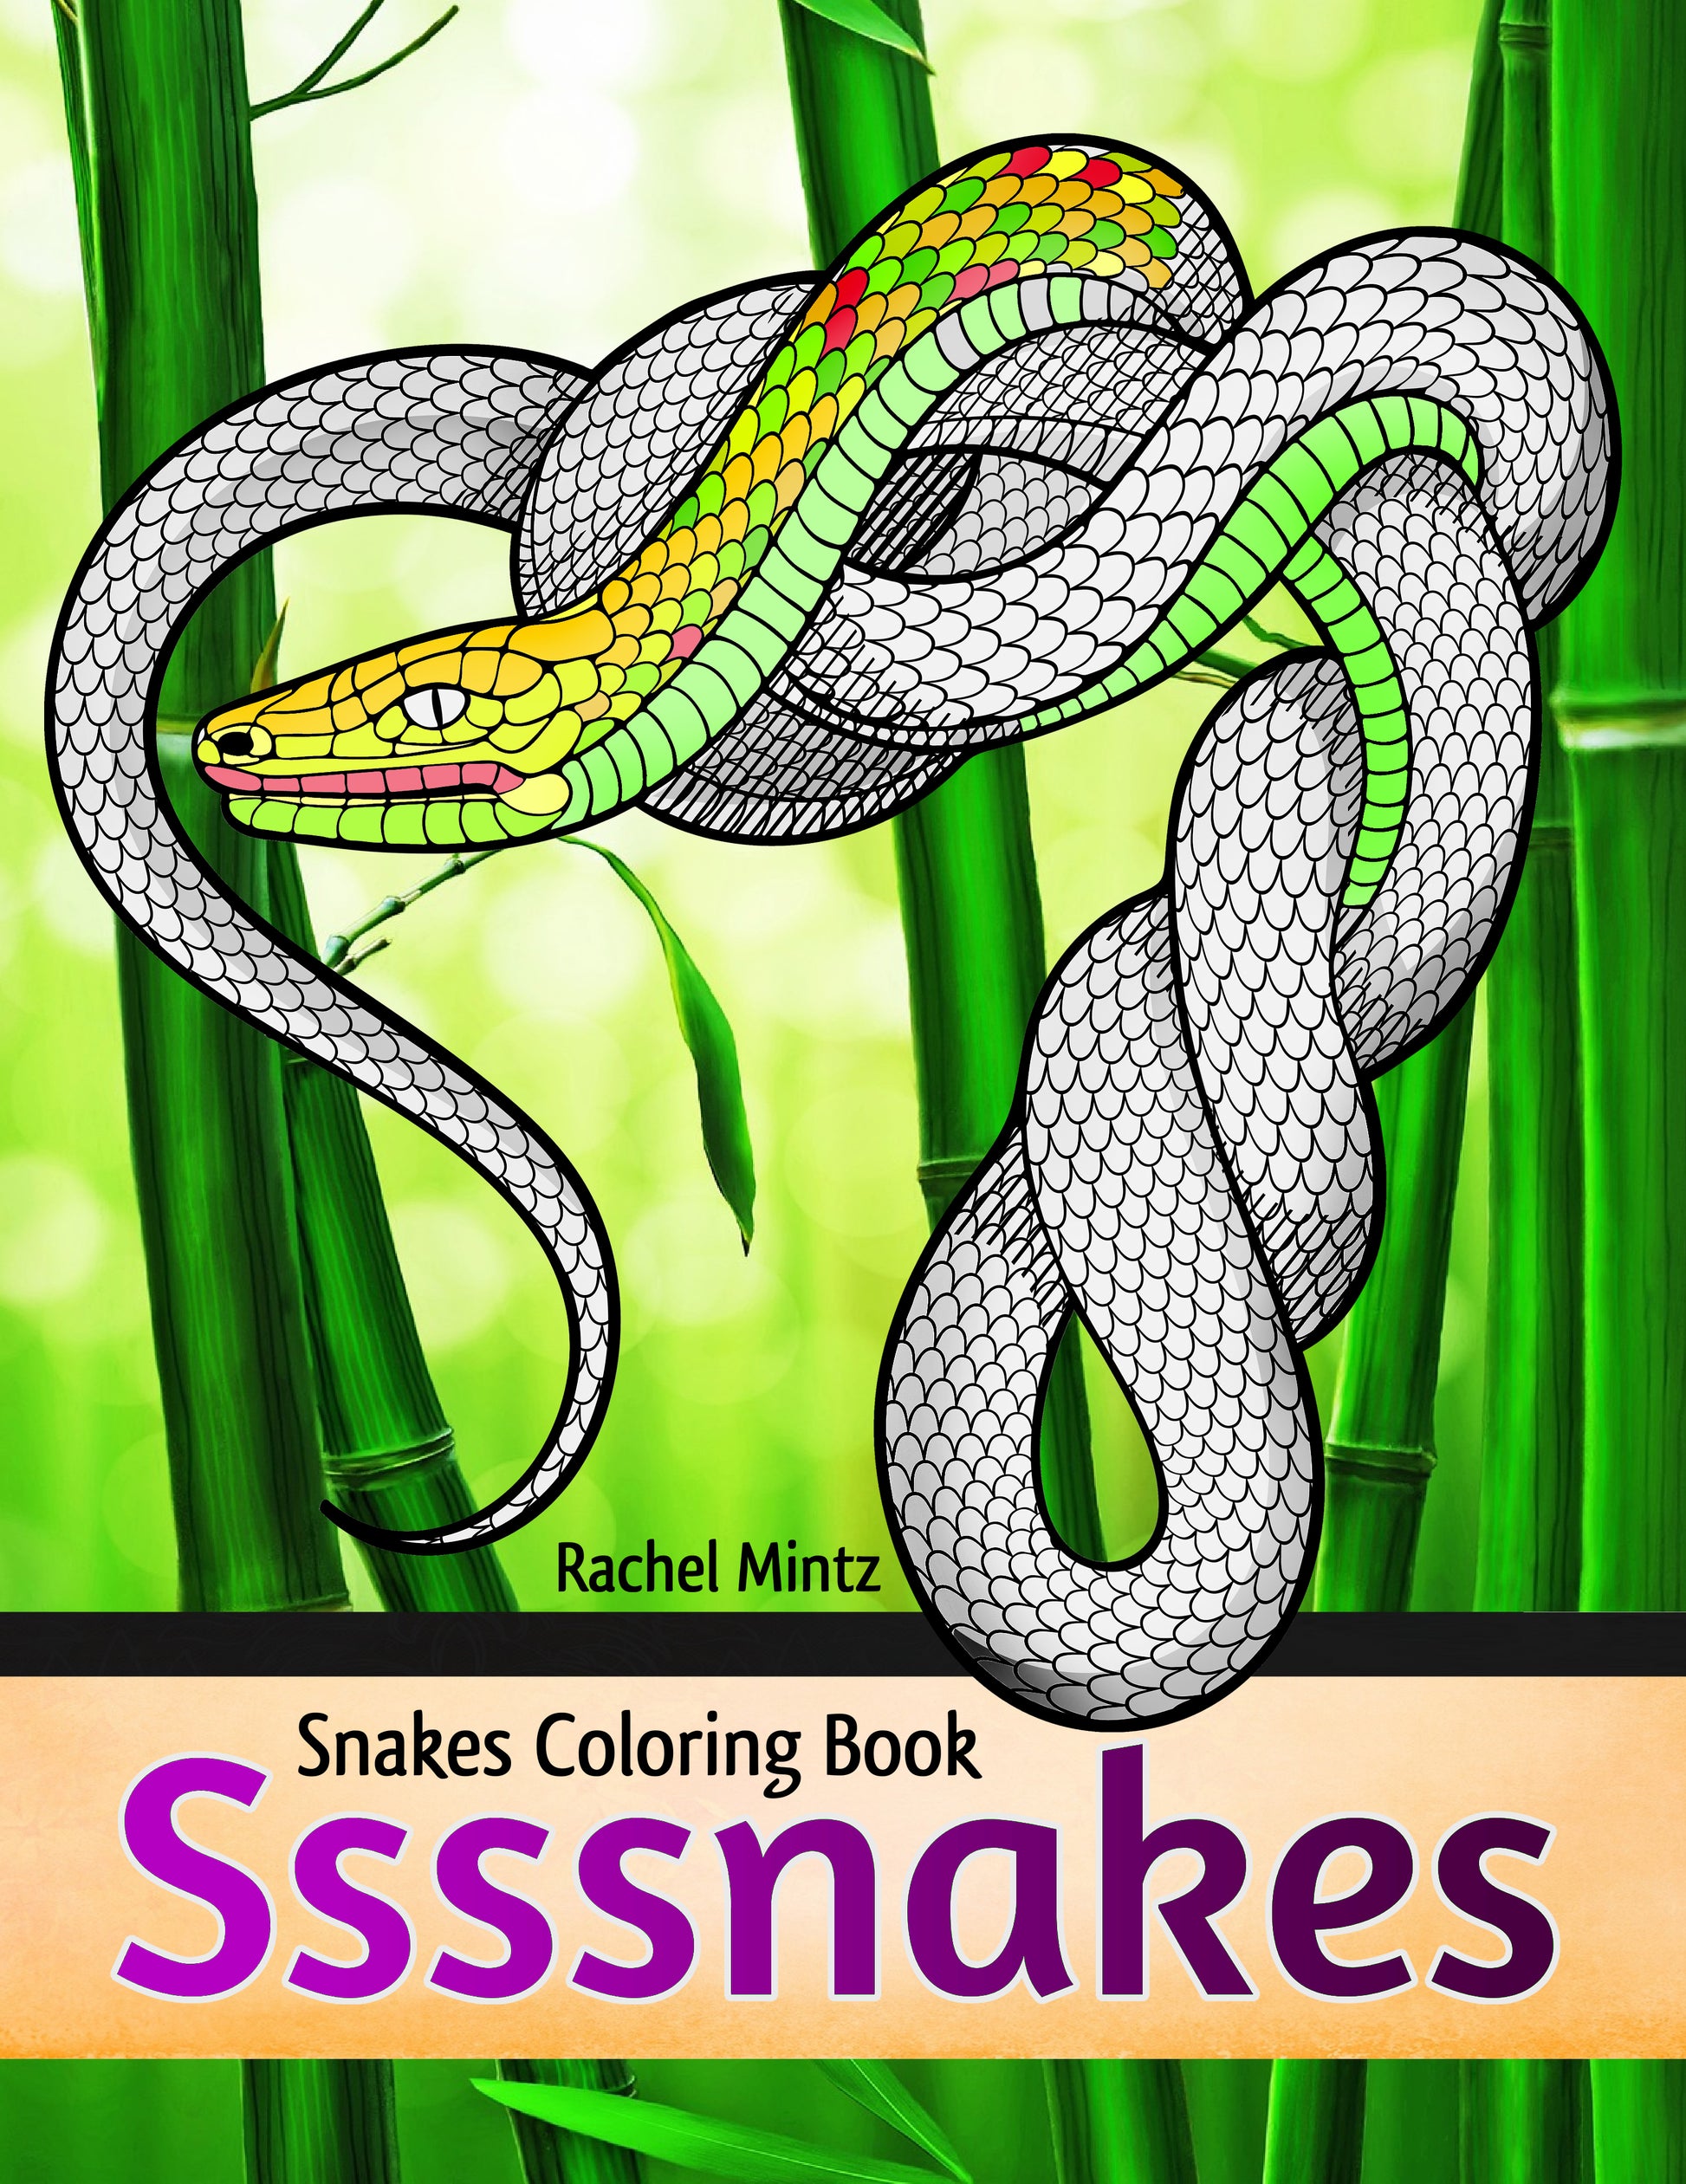 Ssssnakes - Snakes Coloring Book With Reptiles Rachel Mintz